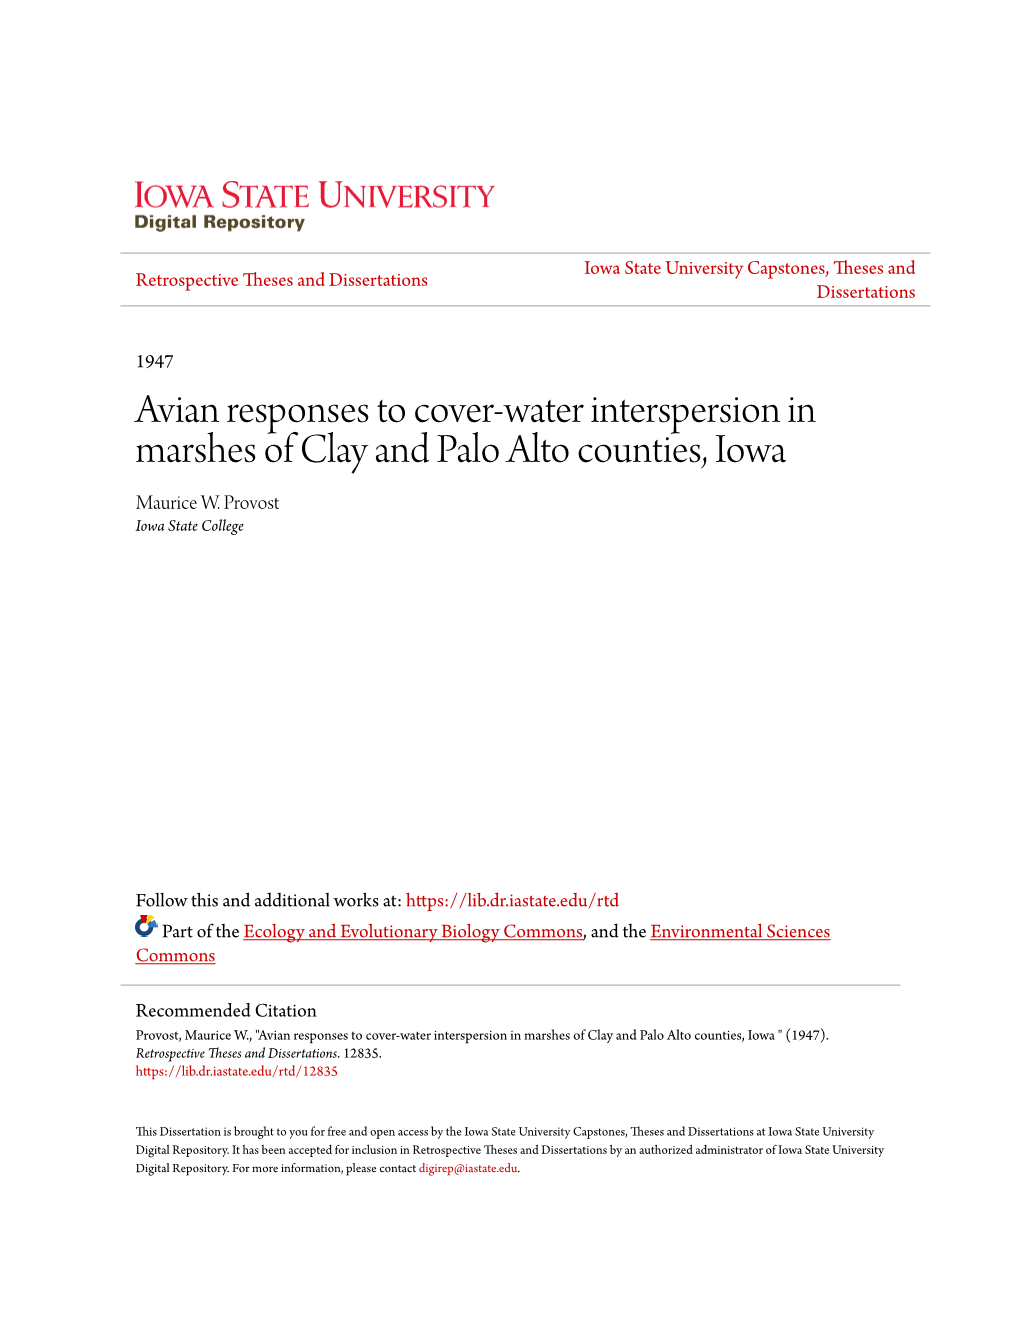 Avian Responses to Cover-Water Interspersion in Marshes of Clay and Palo Alto Counties, Iowa Maurice W